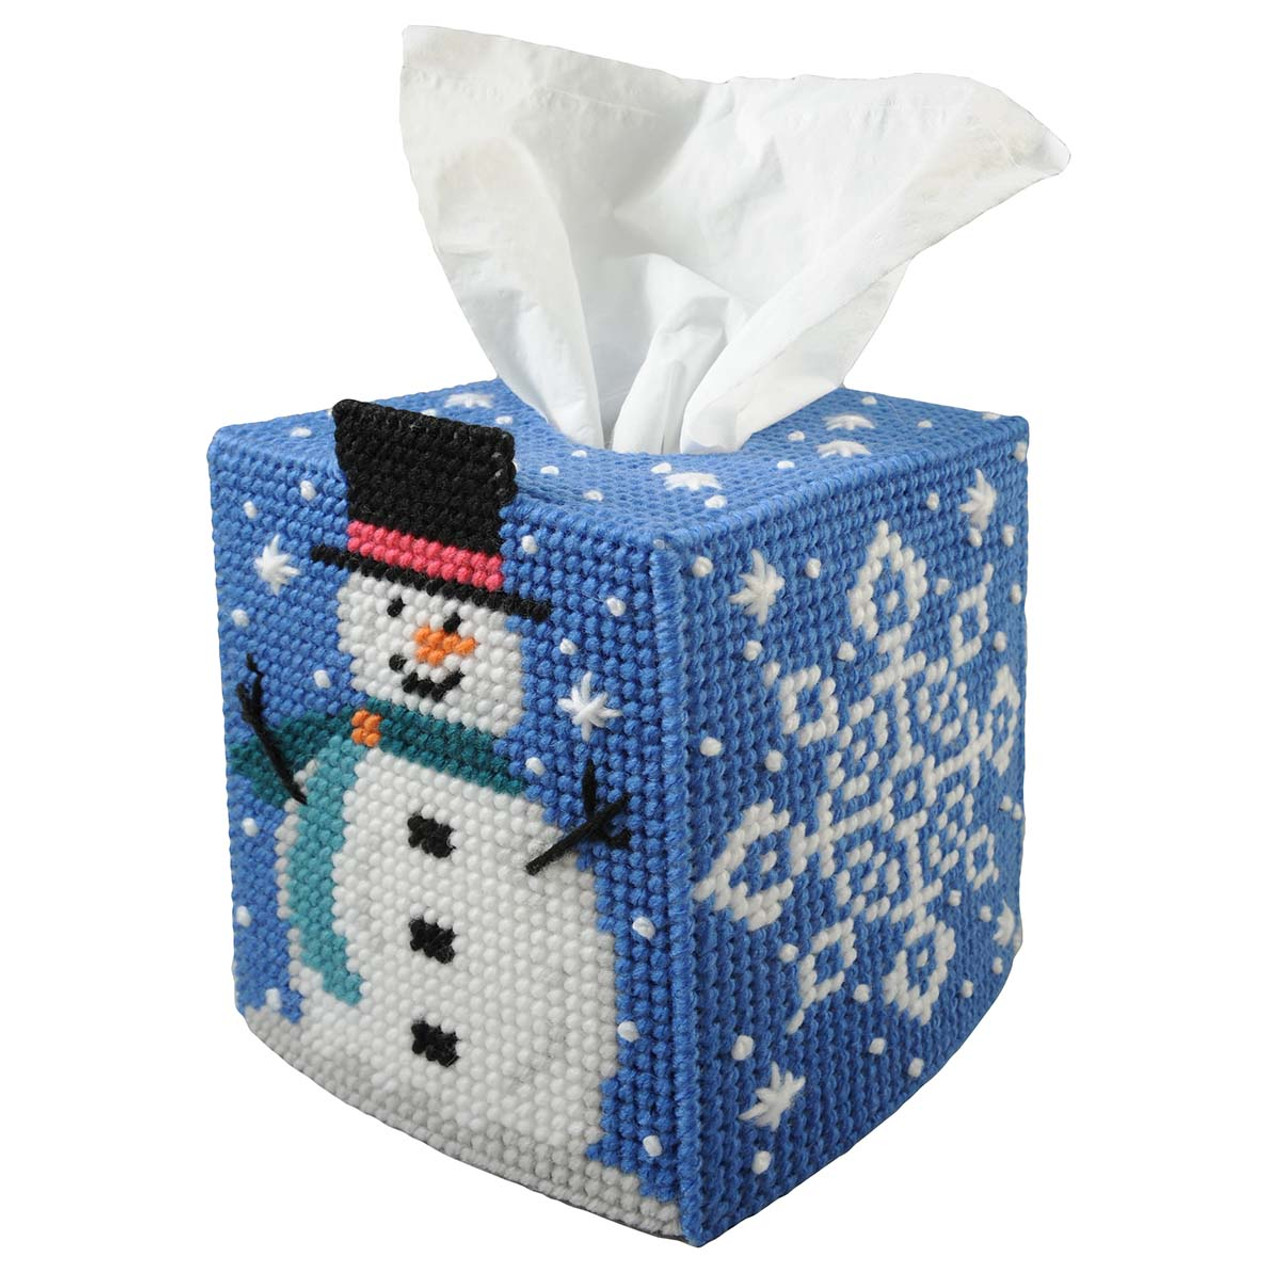 Snow People Tissue Box Cover Plastic Canvas Kit  Plastic canvas tissue  boxes, Plastic canvas, Plastic canvas patterns